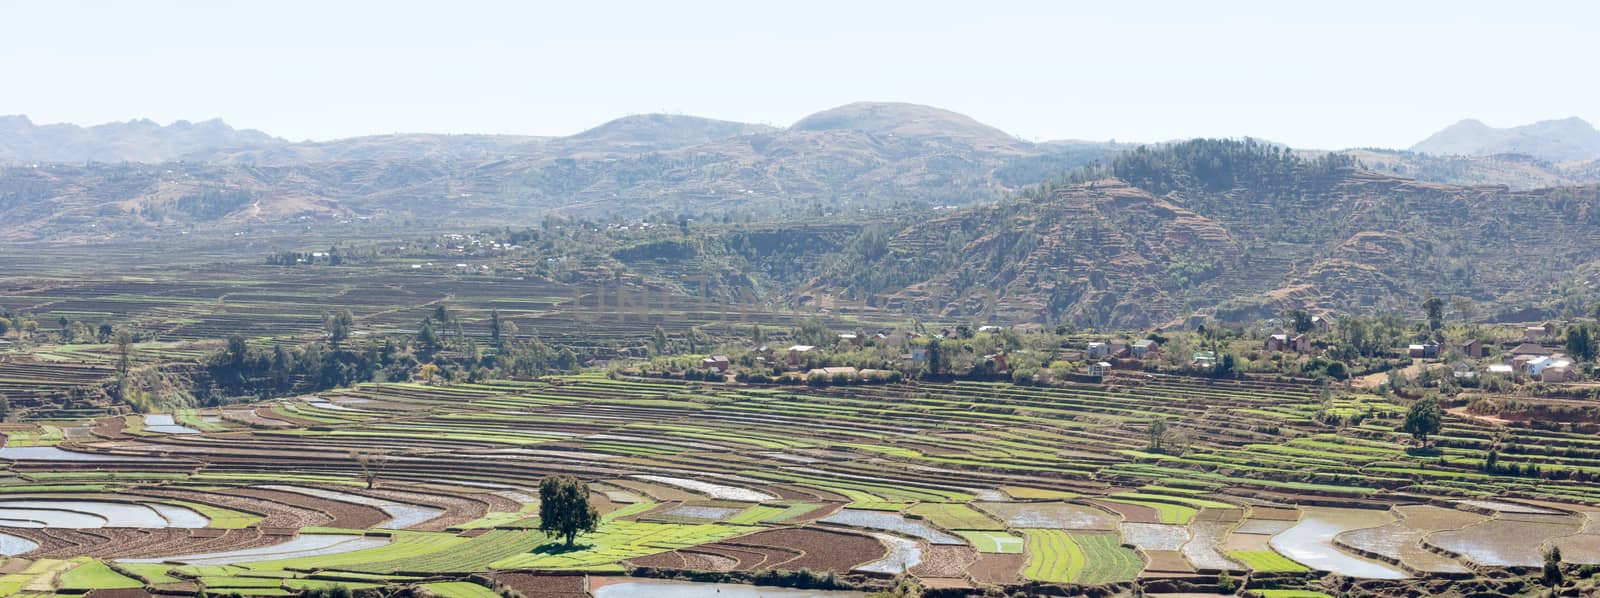 Agricultural fields in Madagascar by michaklootwijk